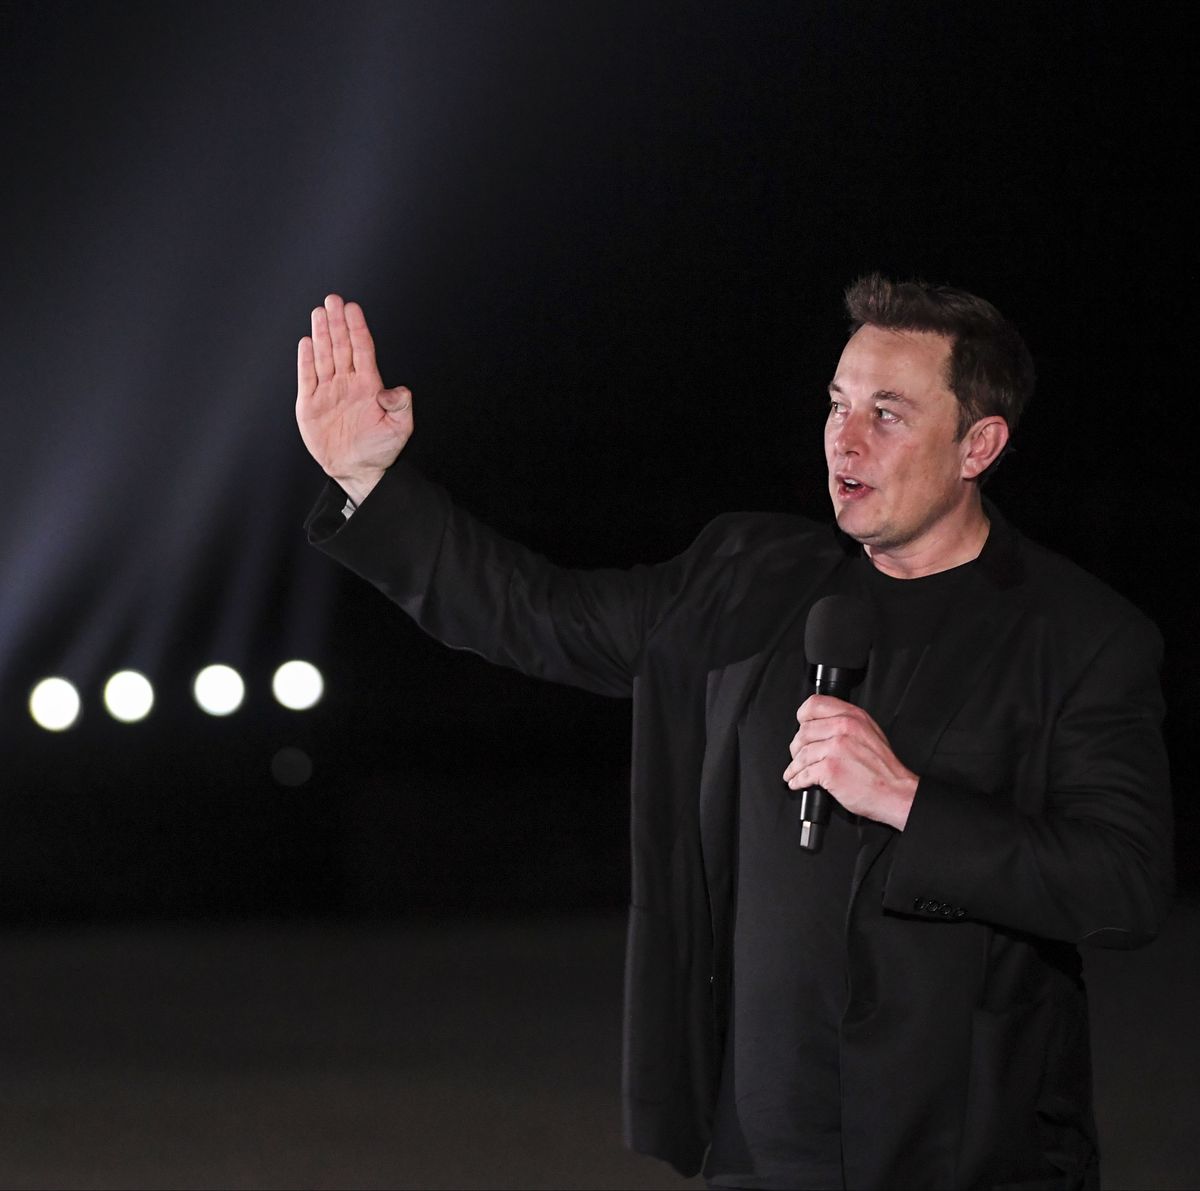 SpaceX CEO Elon Musk will present his Starship Mk1 rocket at their Boca Chica spaceport launch facility.